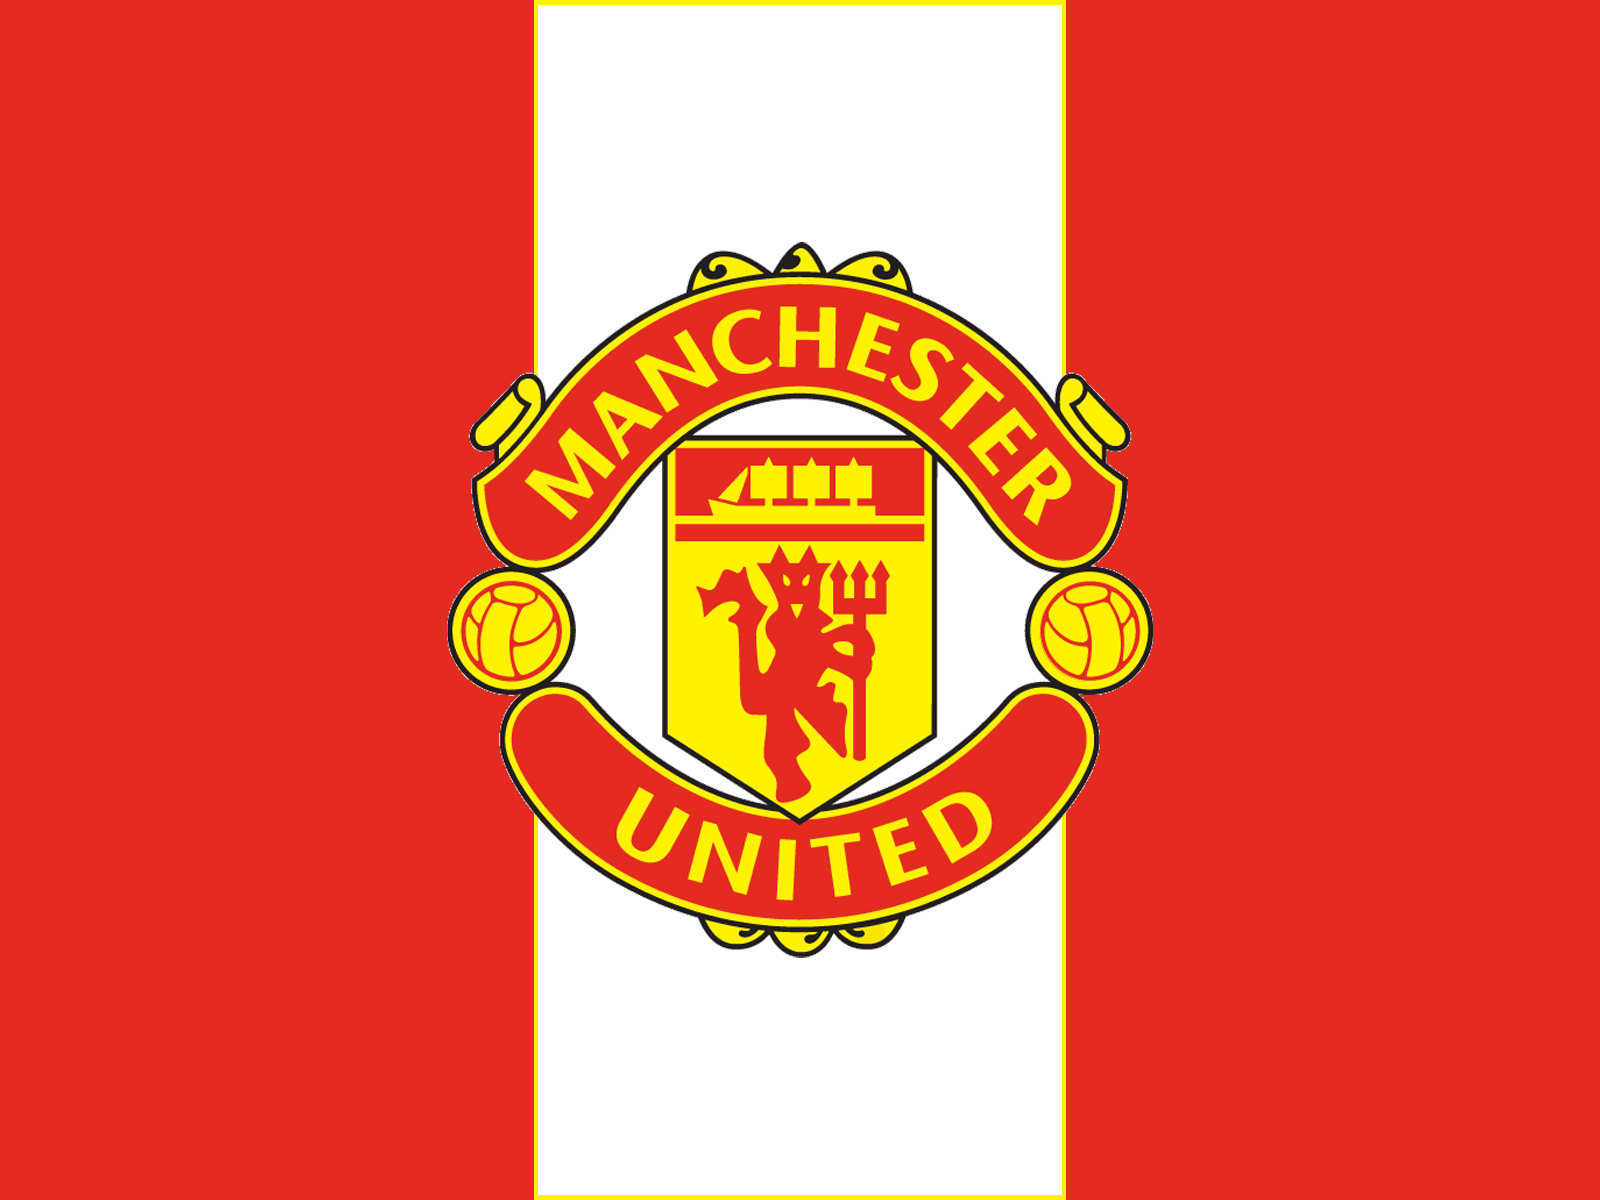 Manchester united high def logo wallpapers